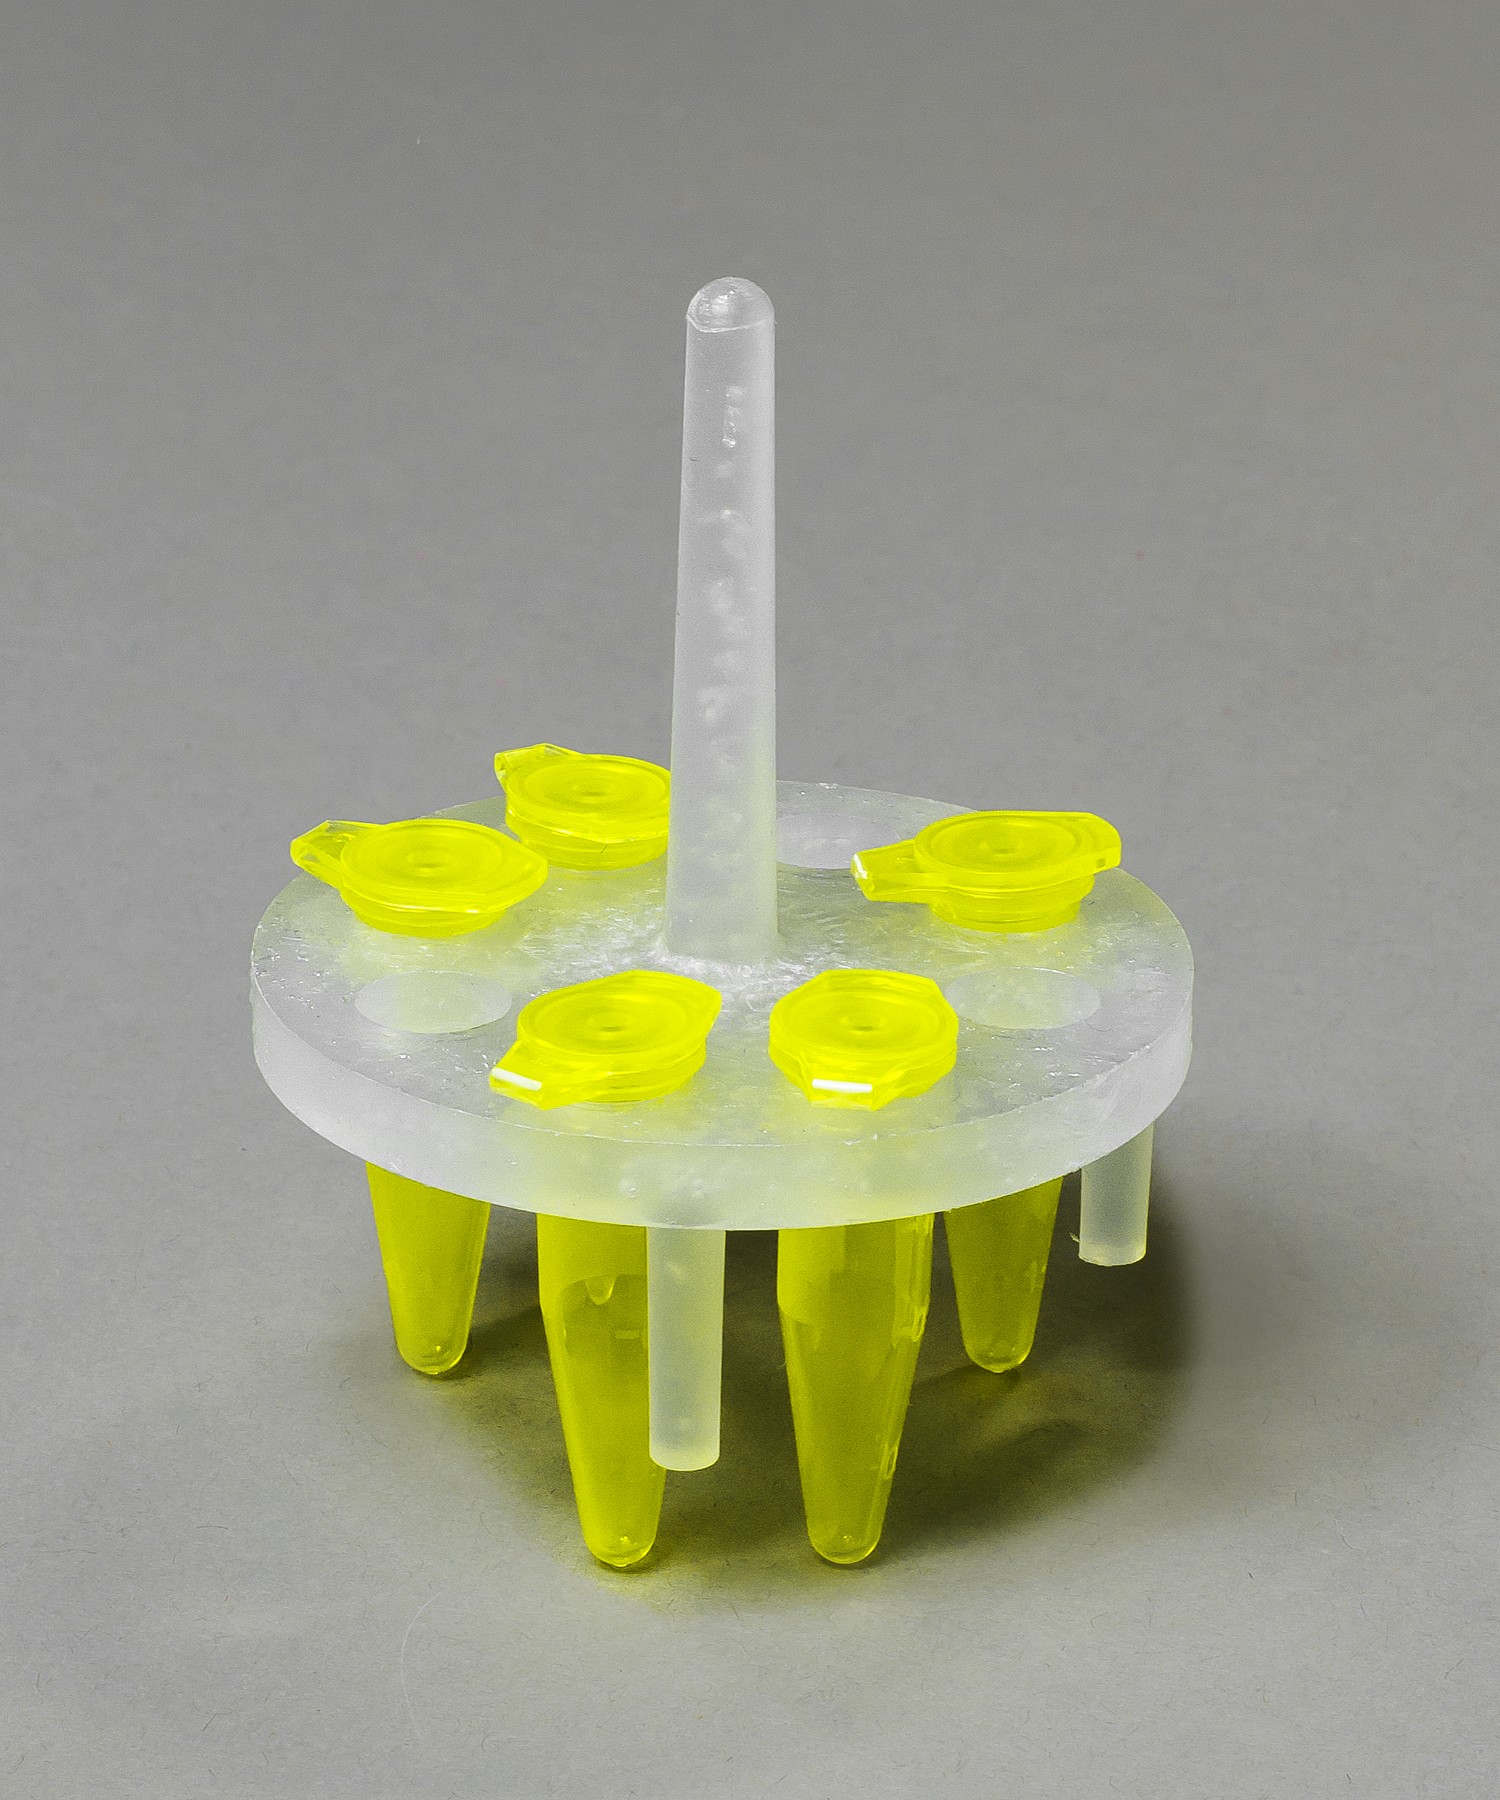 SP Bel-Art ProCulture Round Microcentrifuge Floating Bubble Rack; For 1.5ml Tubes, 8 Places, Fits in 400ml Beakers